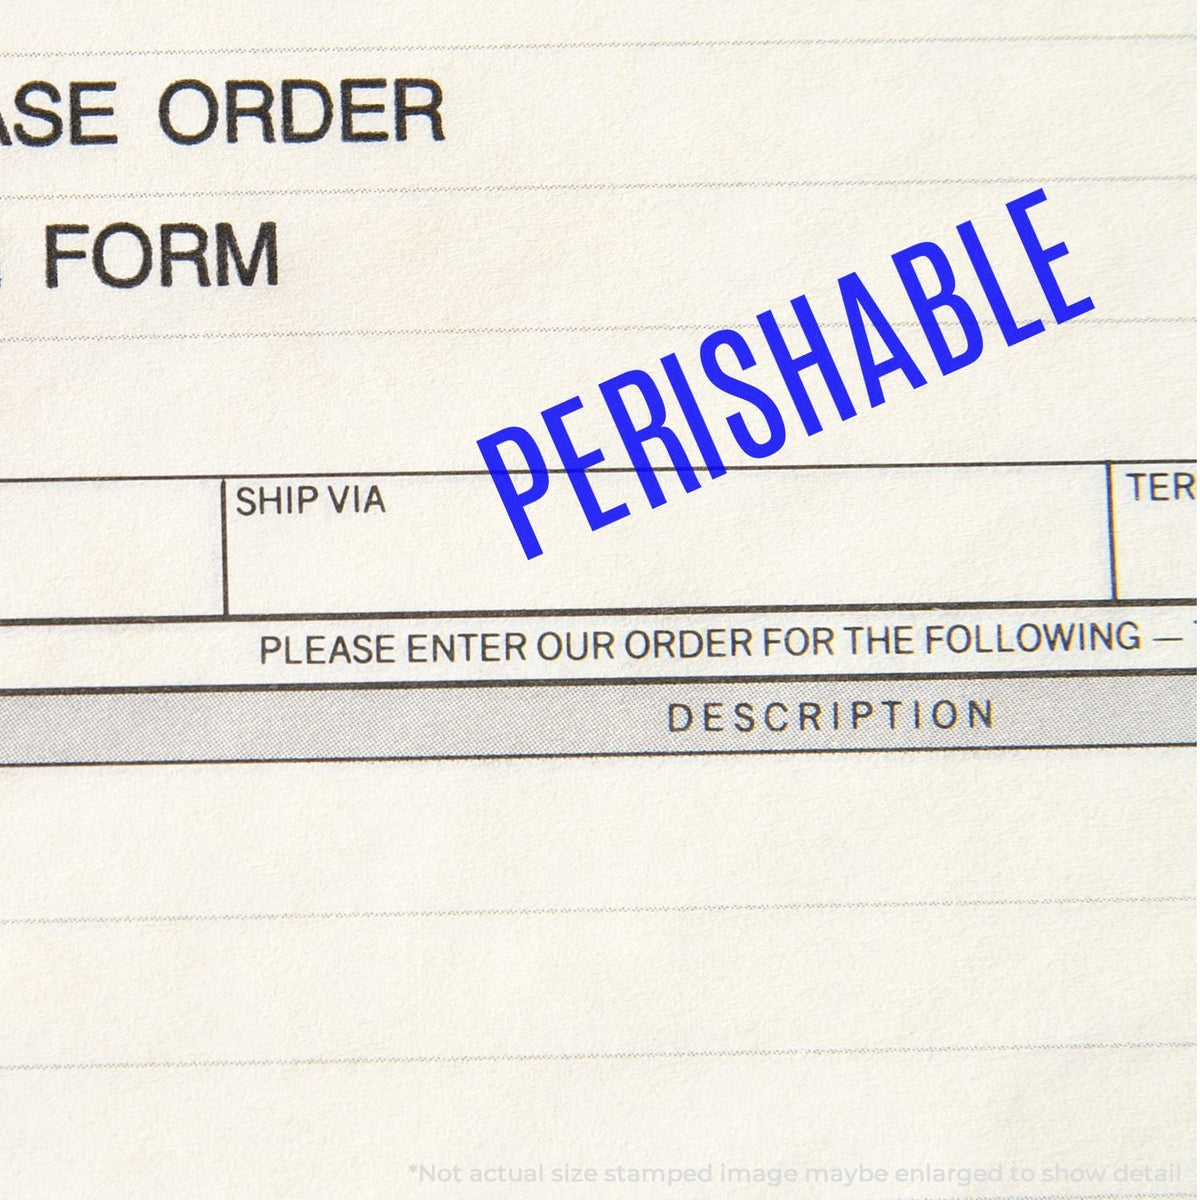 In Use Self-Inking Perishable Stamp Image